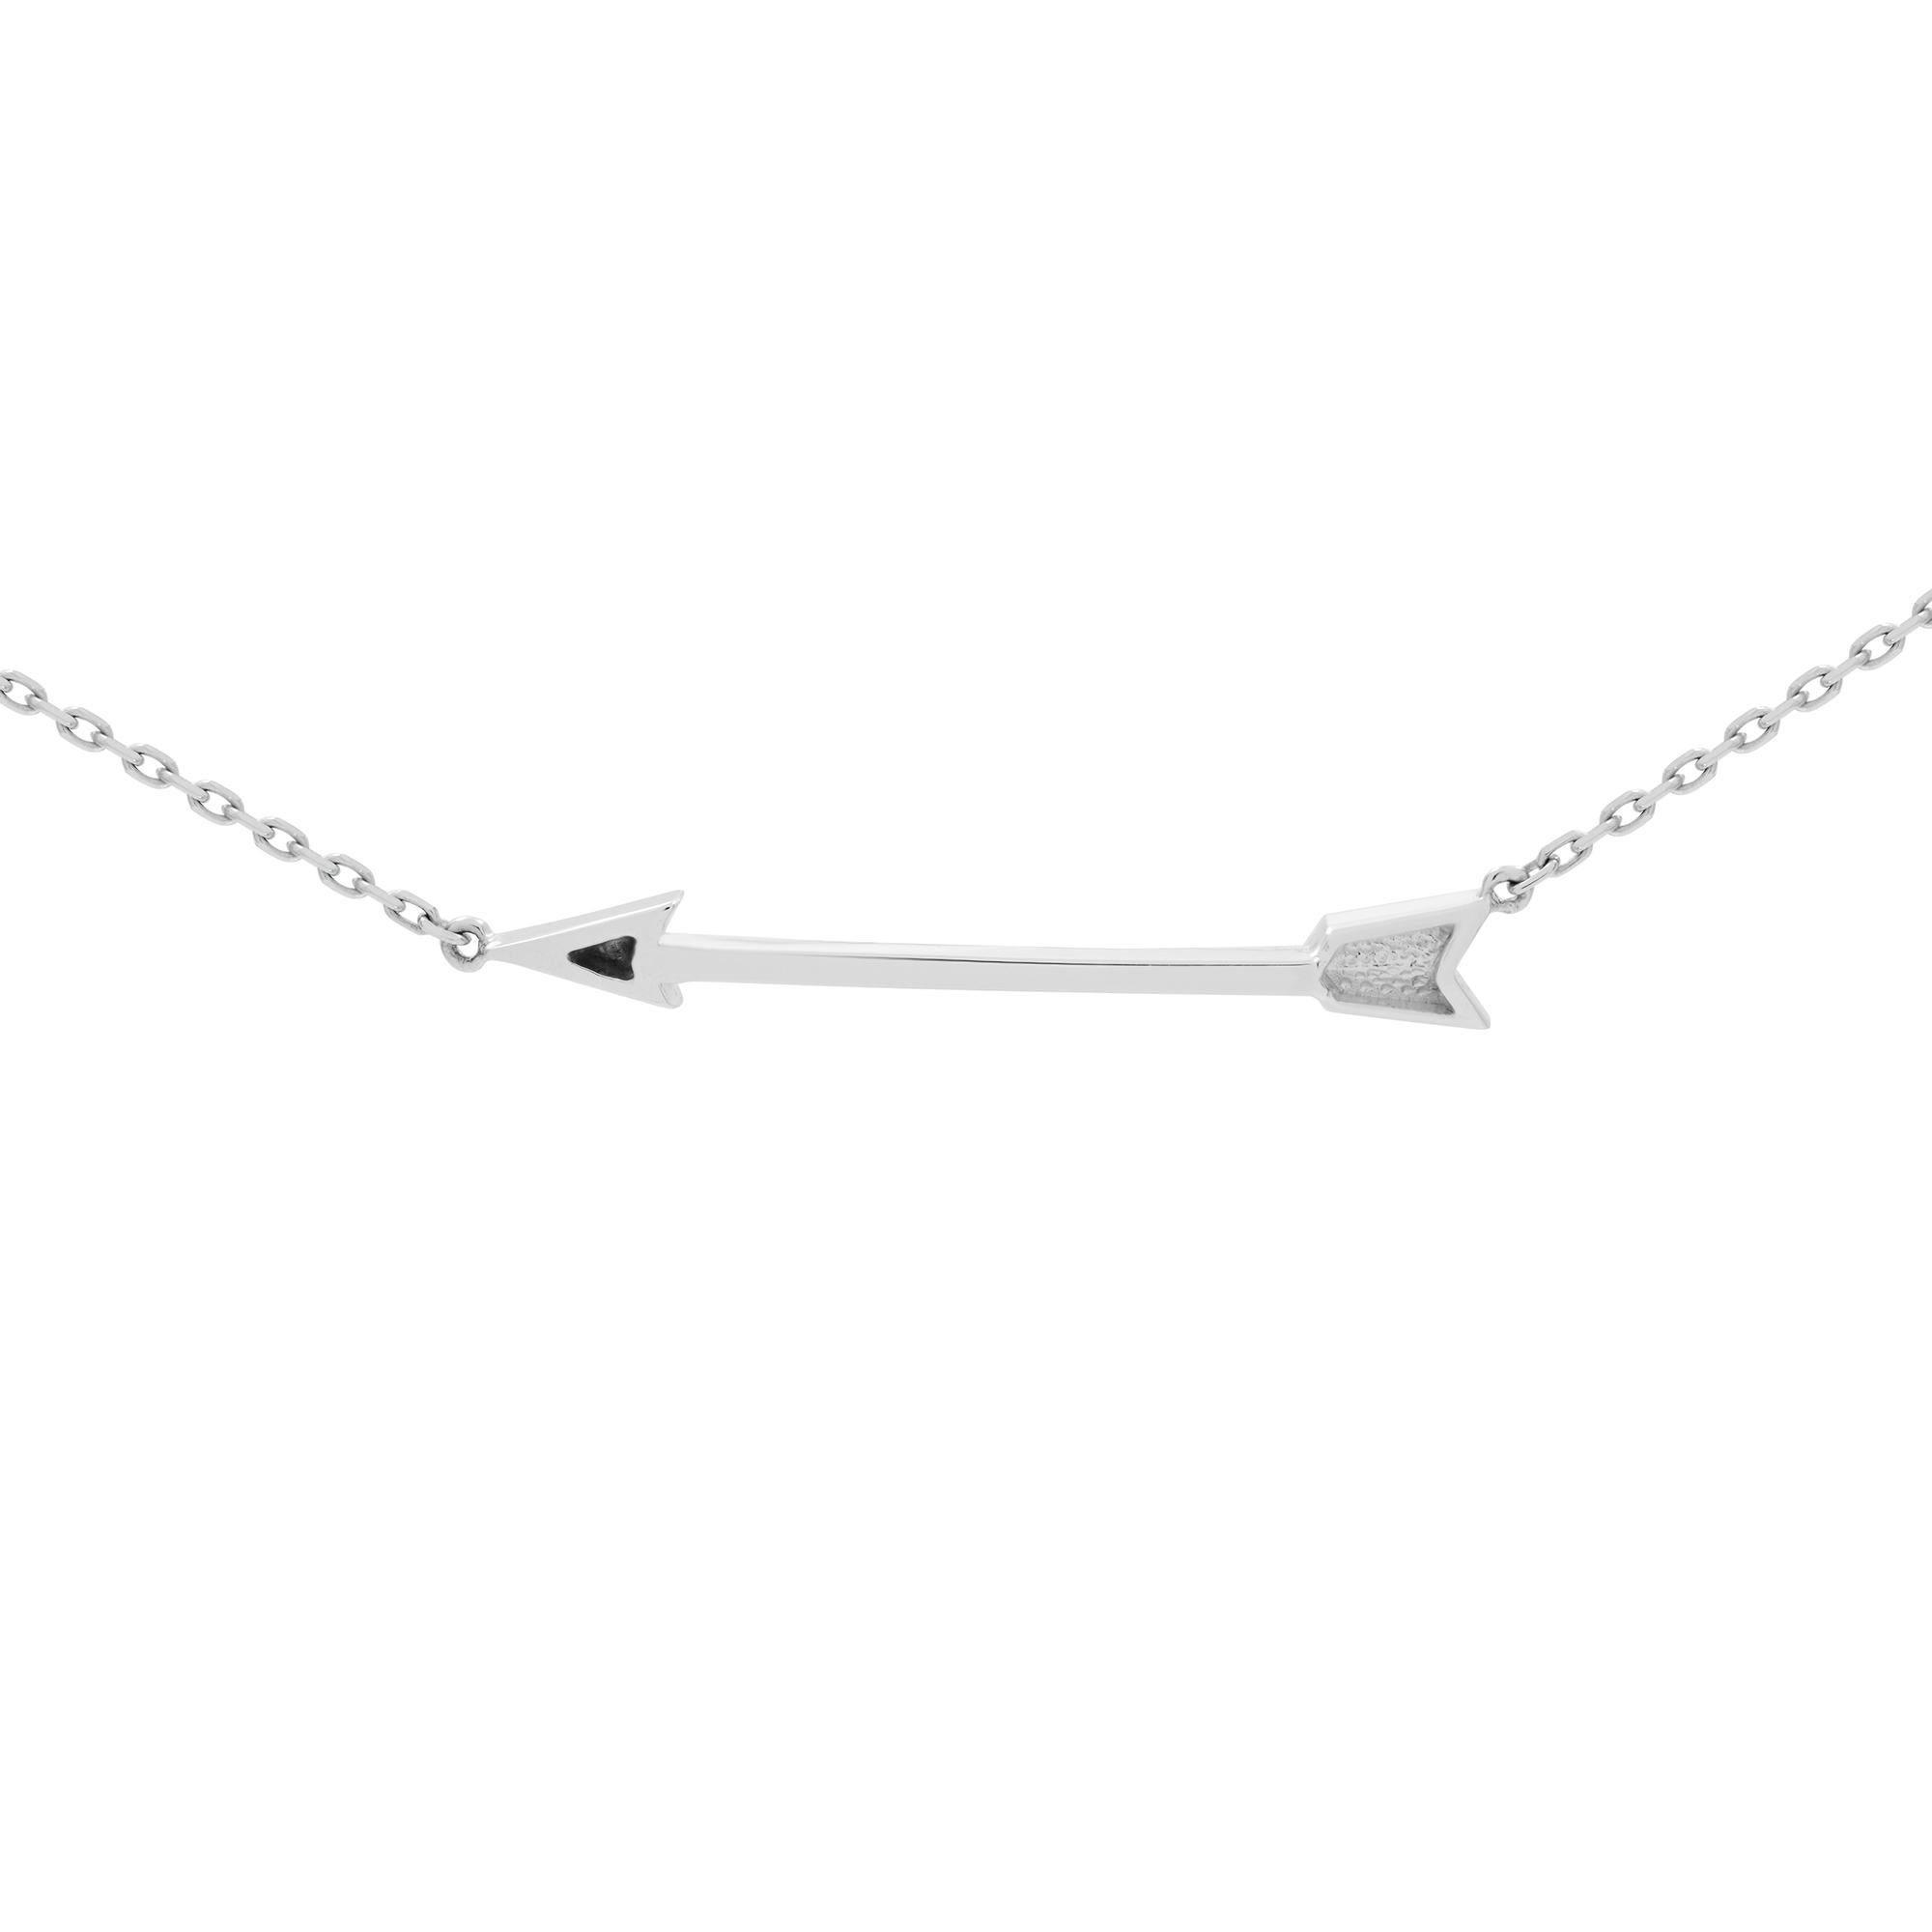 Lead the way with this trendy arrow necklace for her, crafted in 14K white gold and set with 0.10cttw of shimmering round cut diamonds. Diamond color G and VS-SI clarity. Arrow size: 35.00mm. Chain length: 16.5 inches. The necklace comes with a